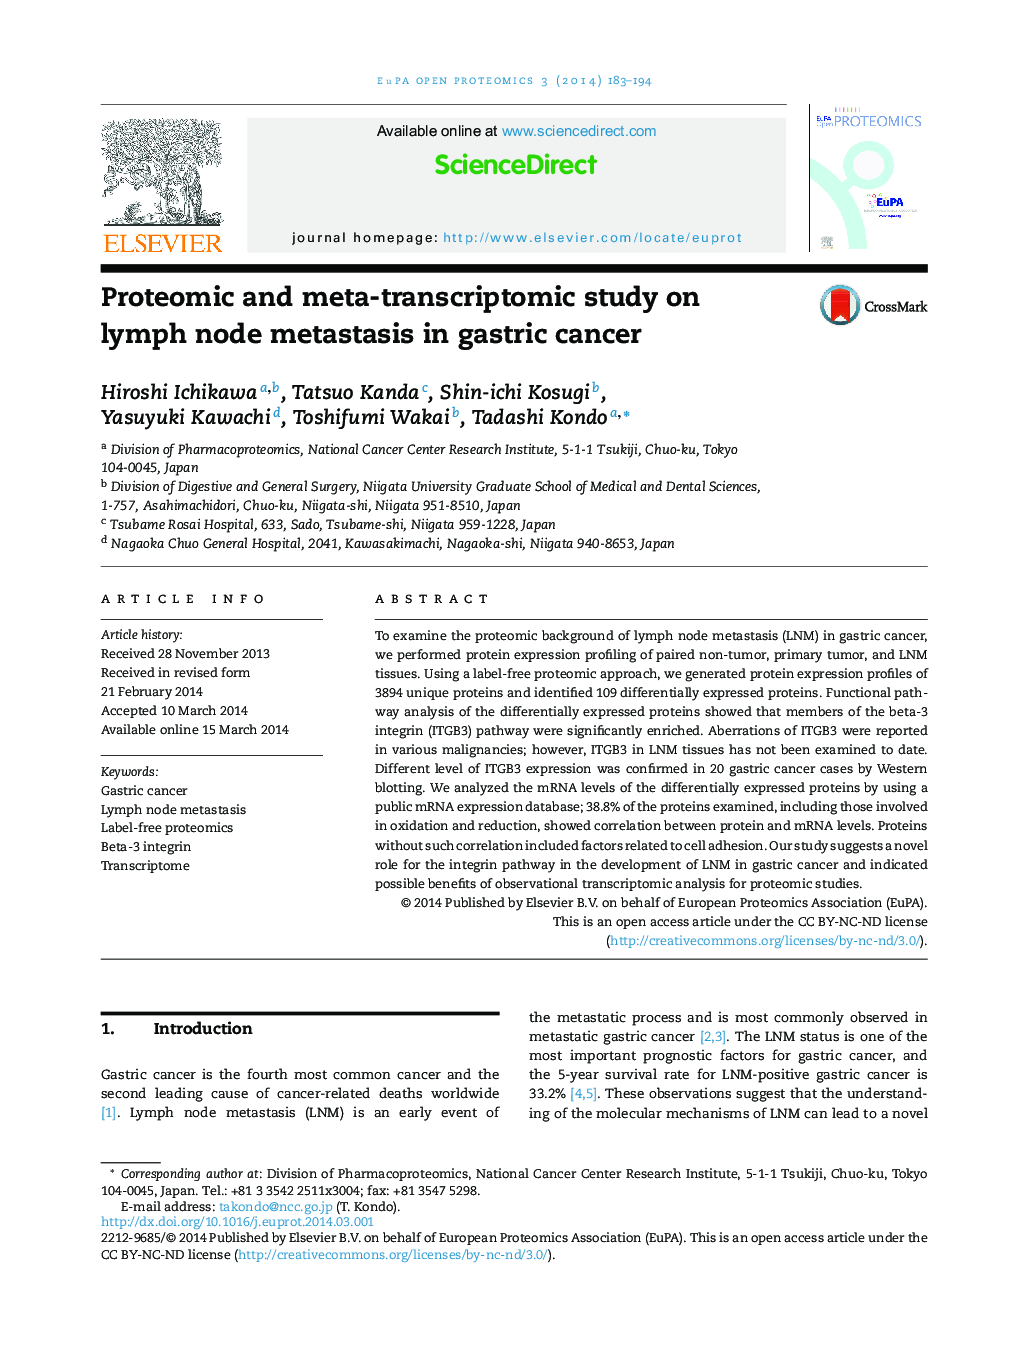 Proteomic and meta-transcriptomic study on lymph node metastasis in gastric cancer 